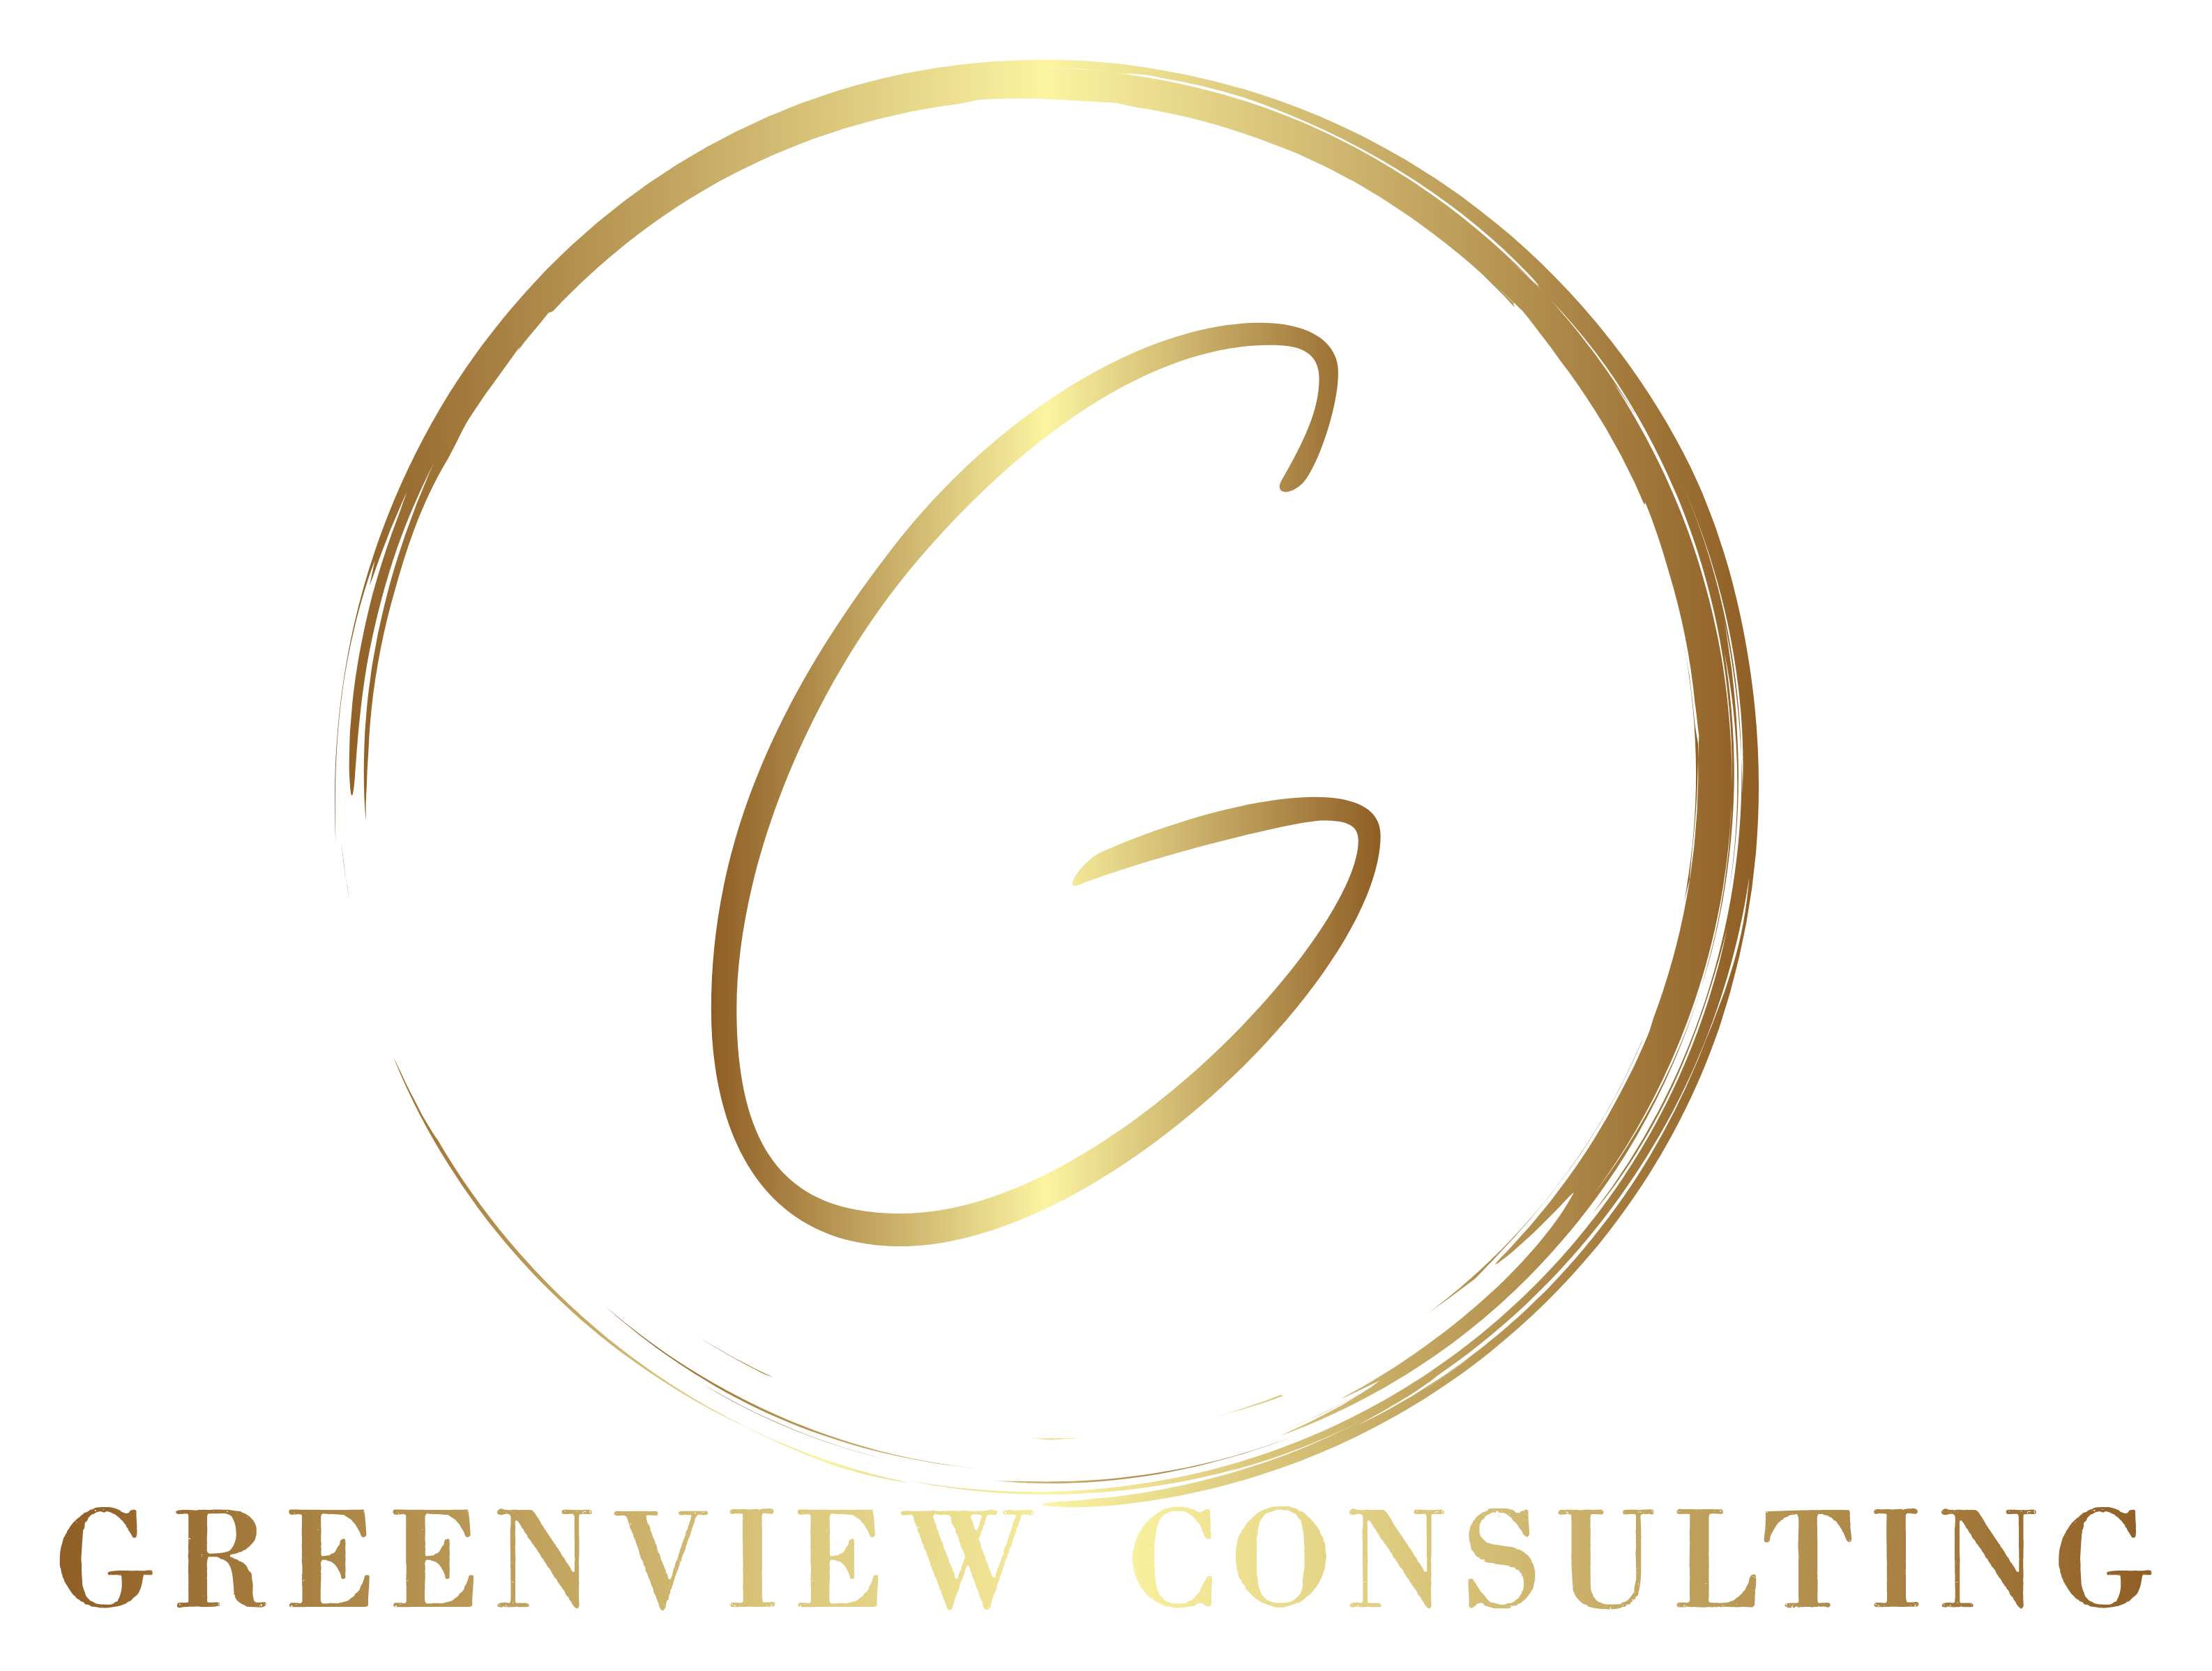 Green View Consulting